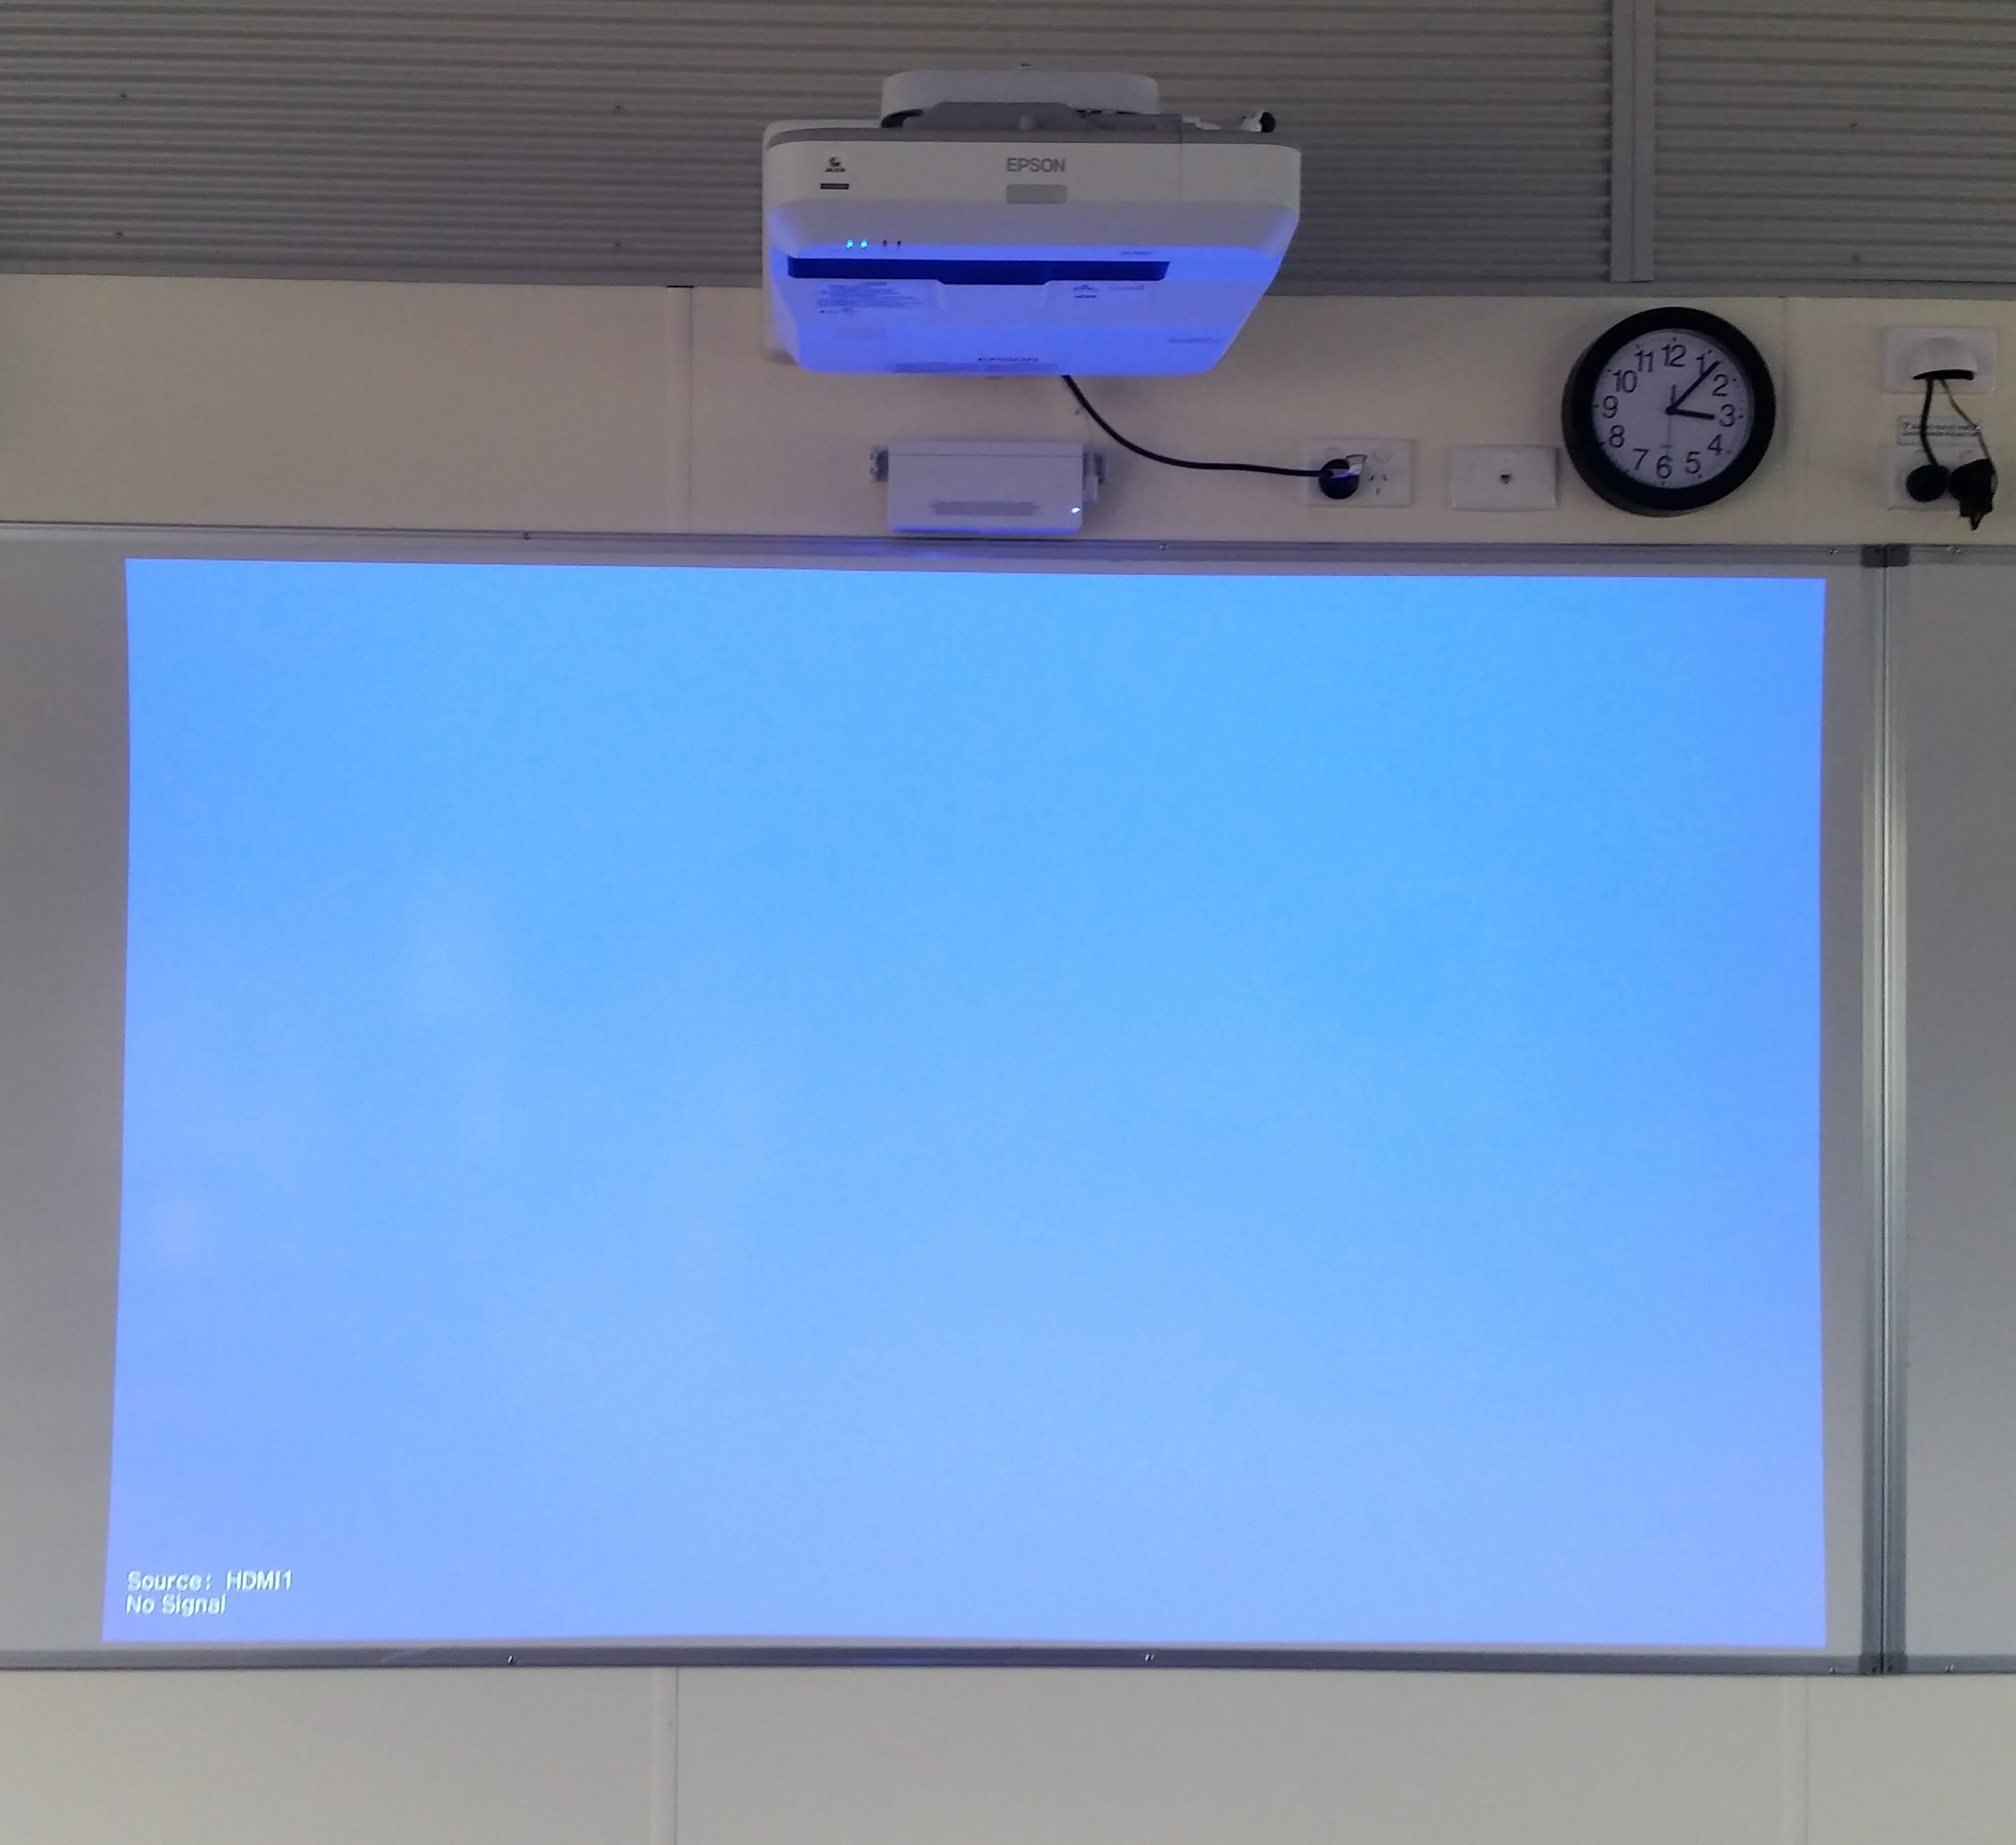 EPSON EB-696Ui Ultra Short Throw Finger Touch Interactive Projector at Balwyn High